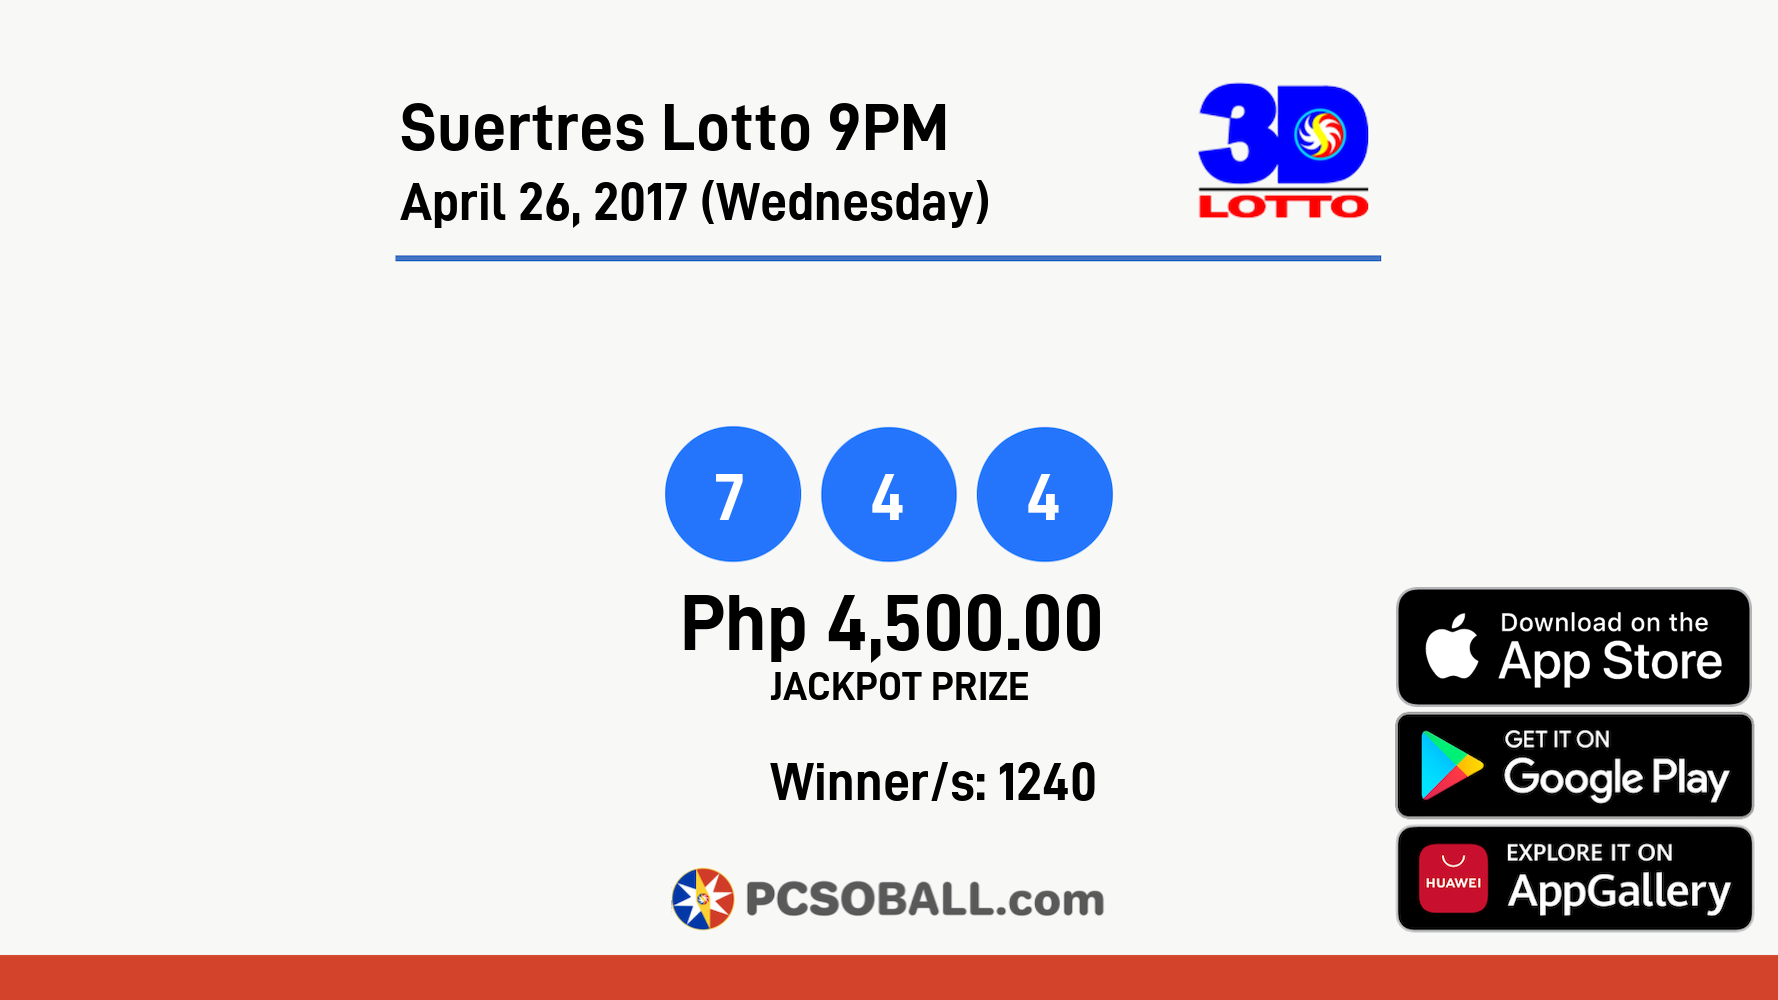 Suertres Lotto 9PM April 26, 2017 (Wednesday) Result